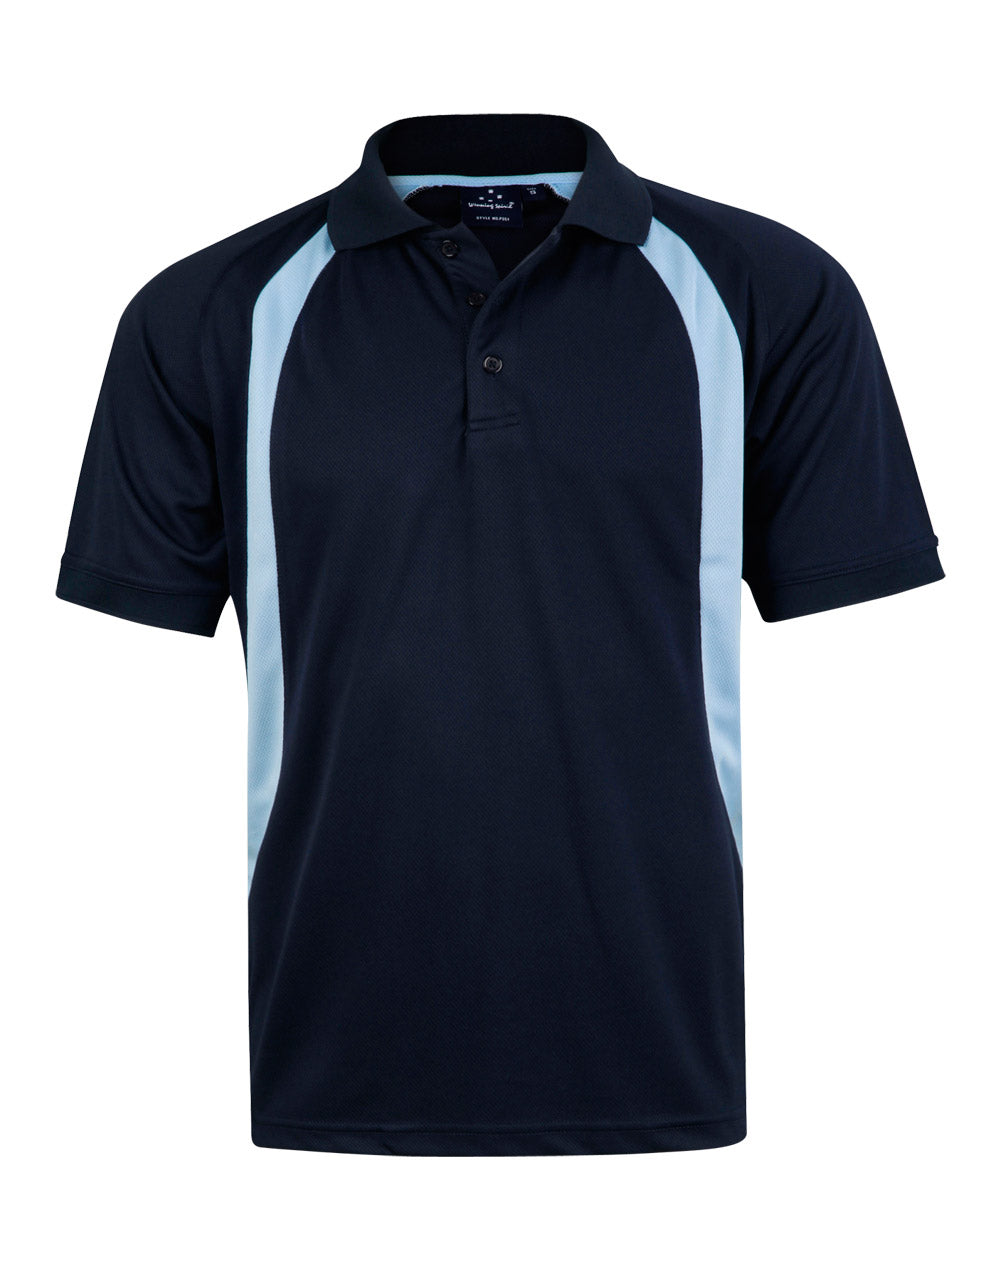 [PS51] Mens CoolDry Soft Mesh Polo